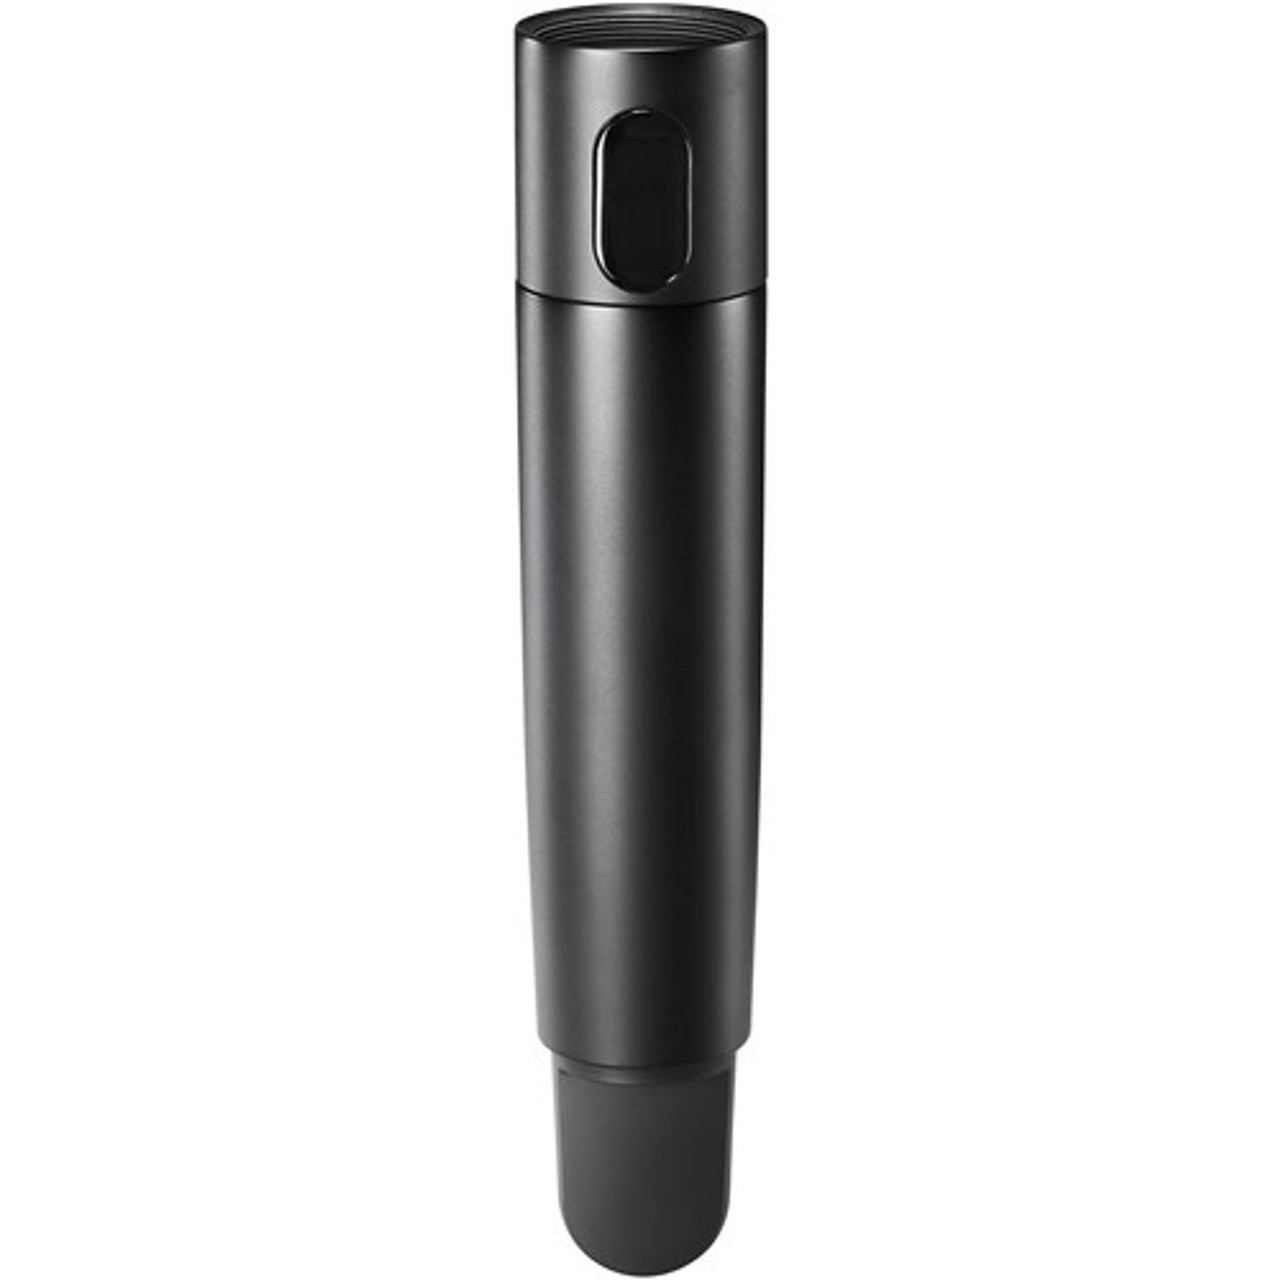 Audio-Technica ATW-ATW-T3202AEE1 handheld microphone/transmitter (no capsule included)